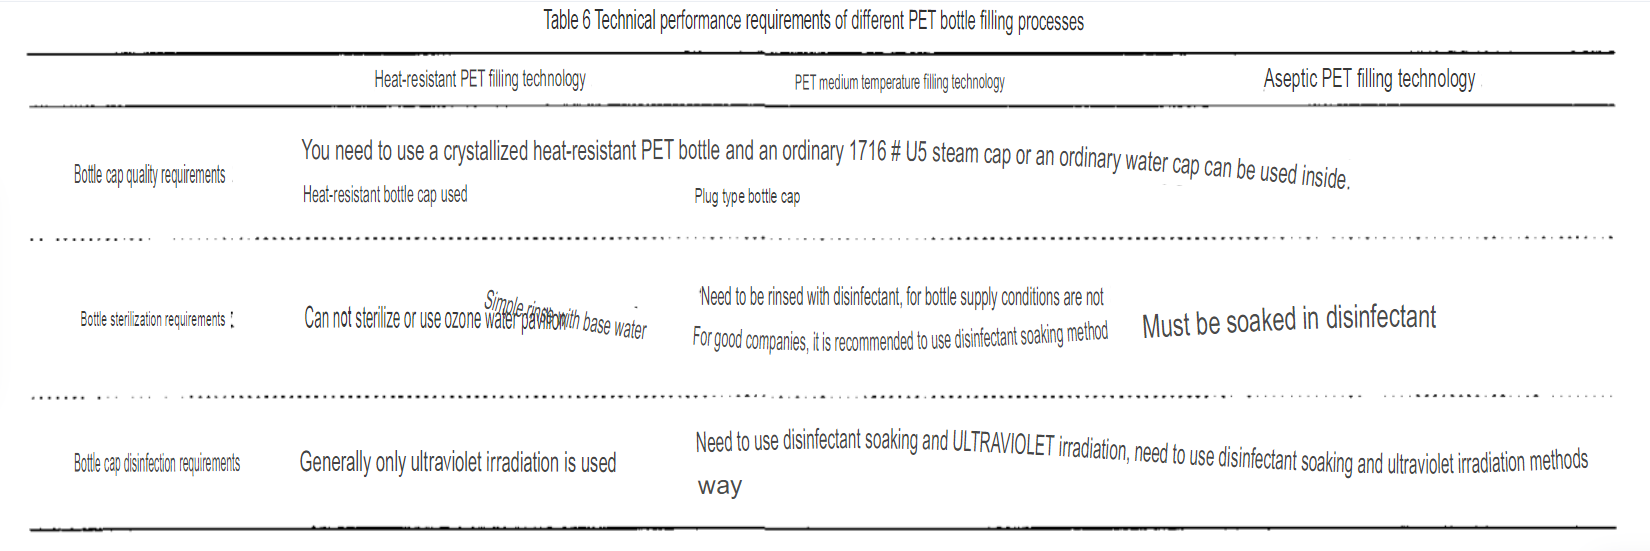  Technical performance requirements of different PET bottle filling processes